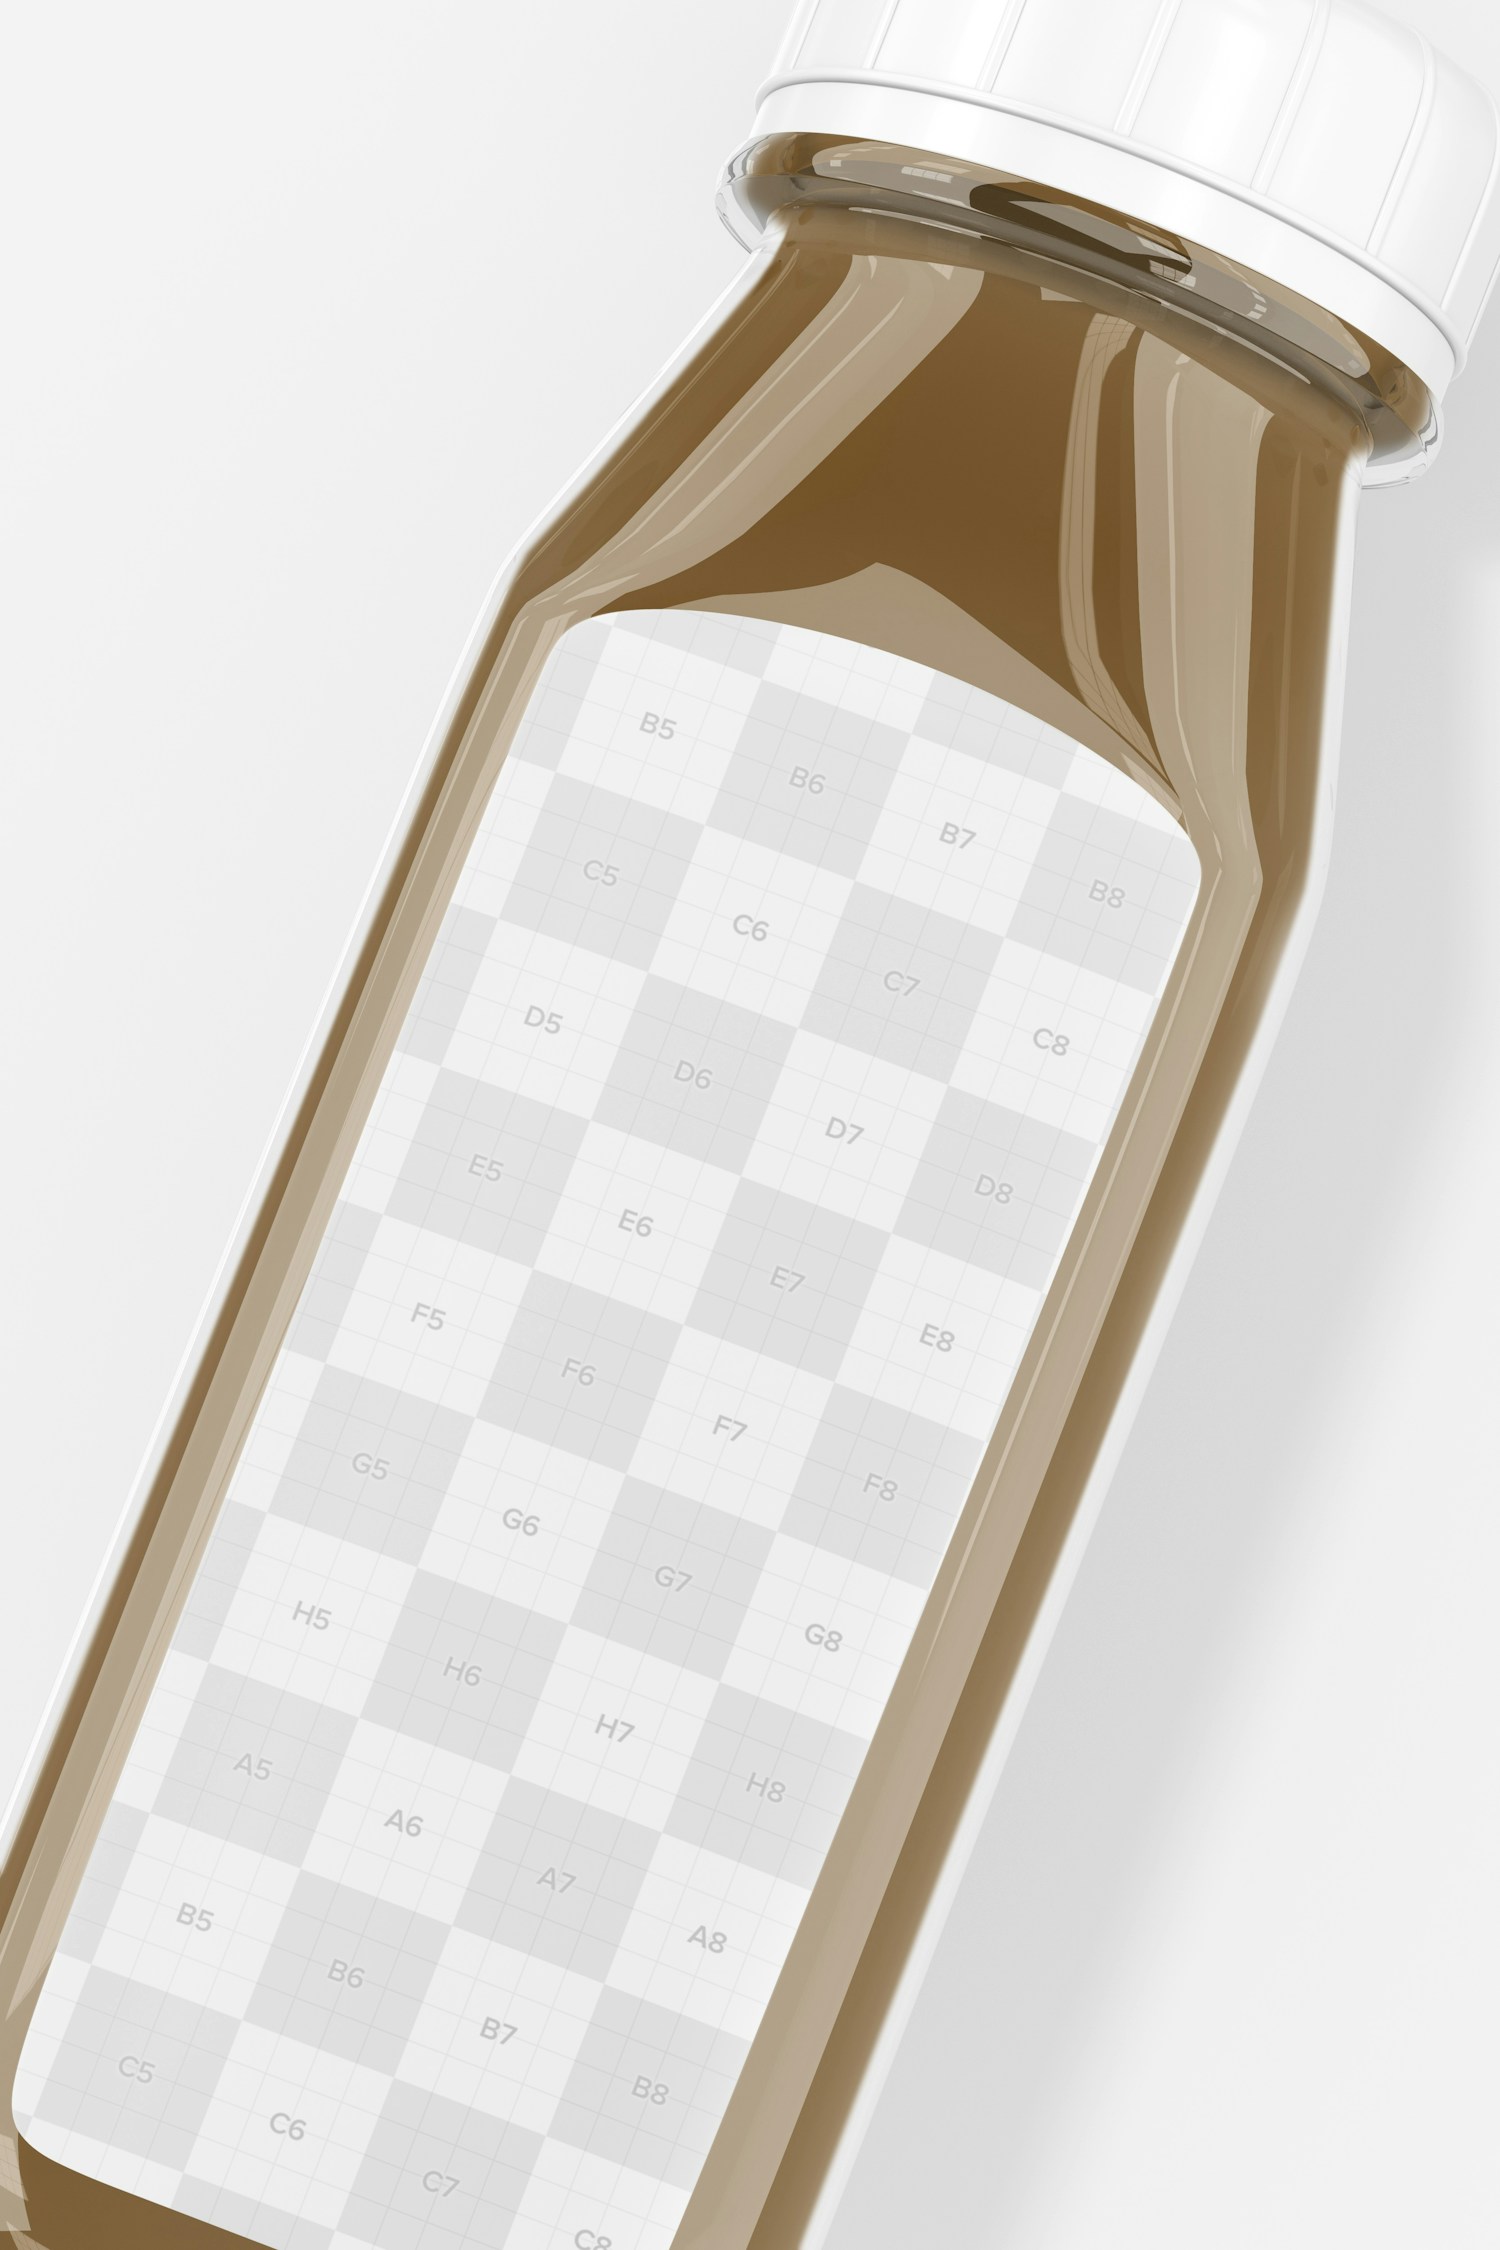 Iced Coffee Glass Bottle Mockup, Close Up